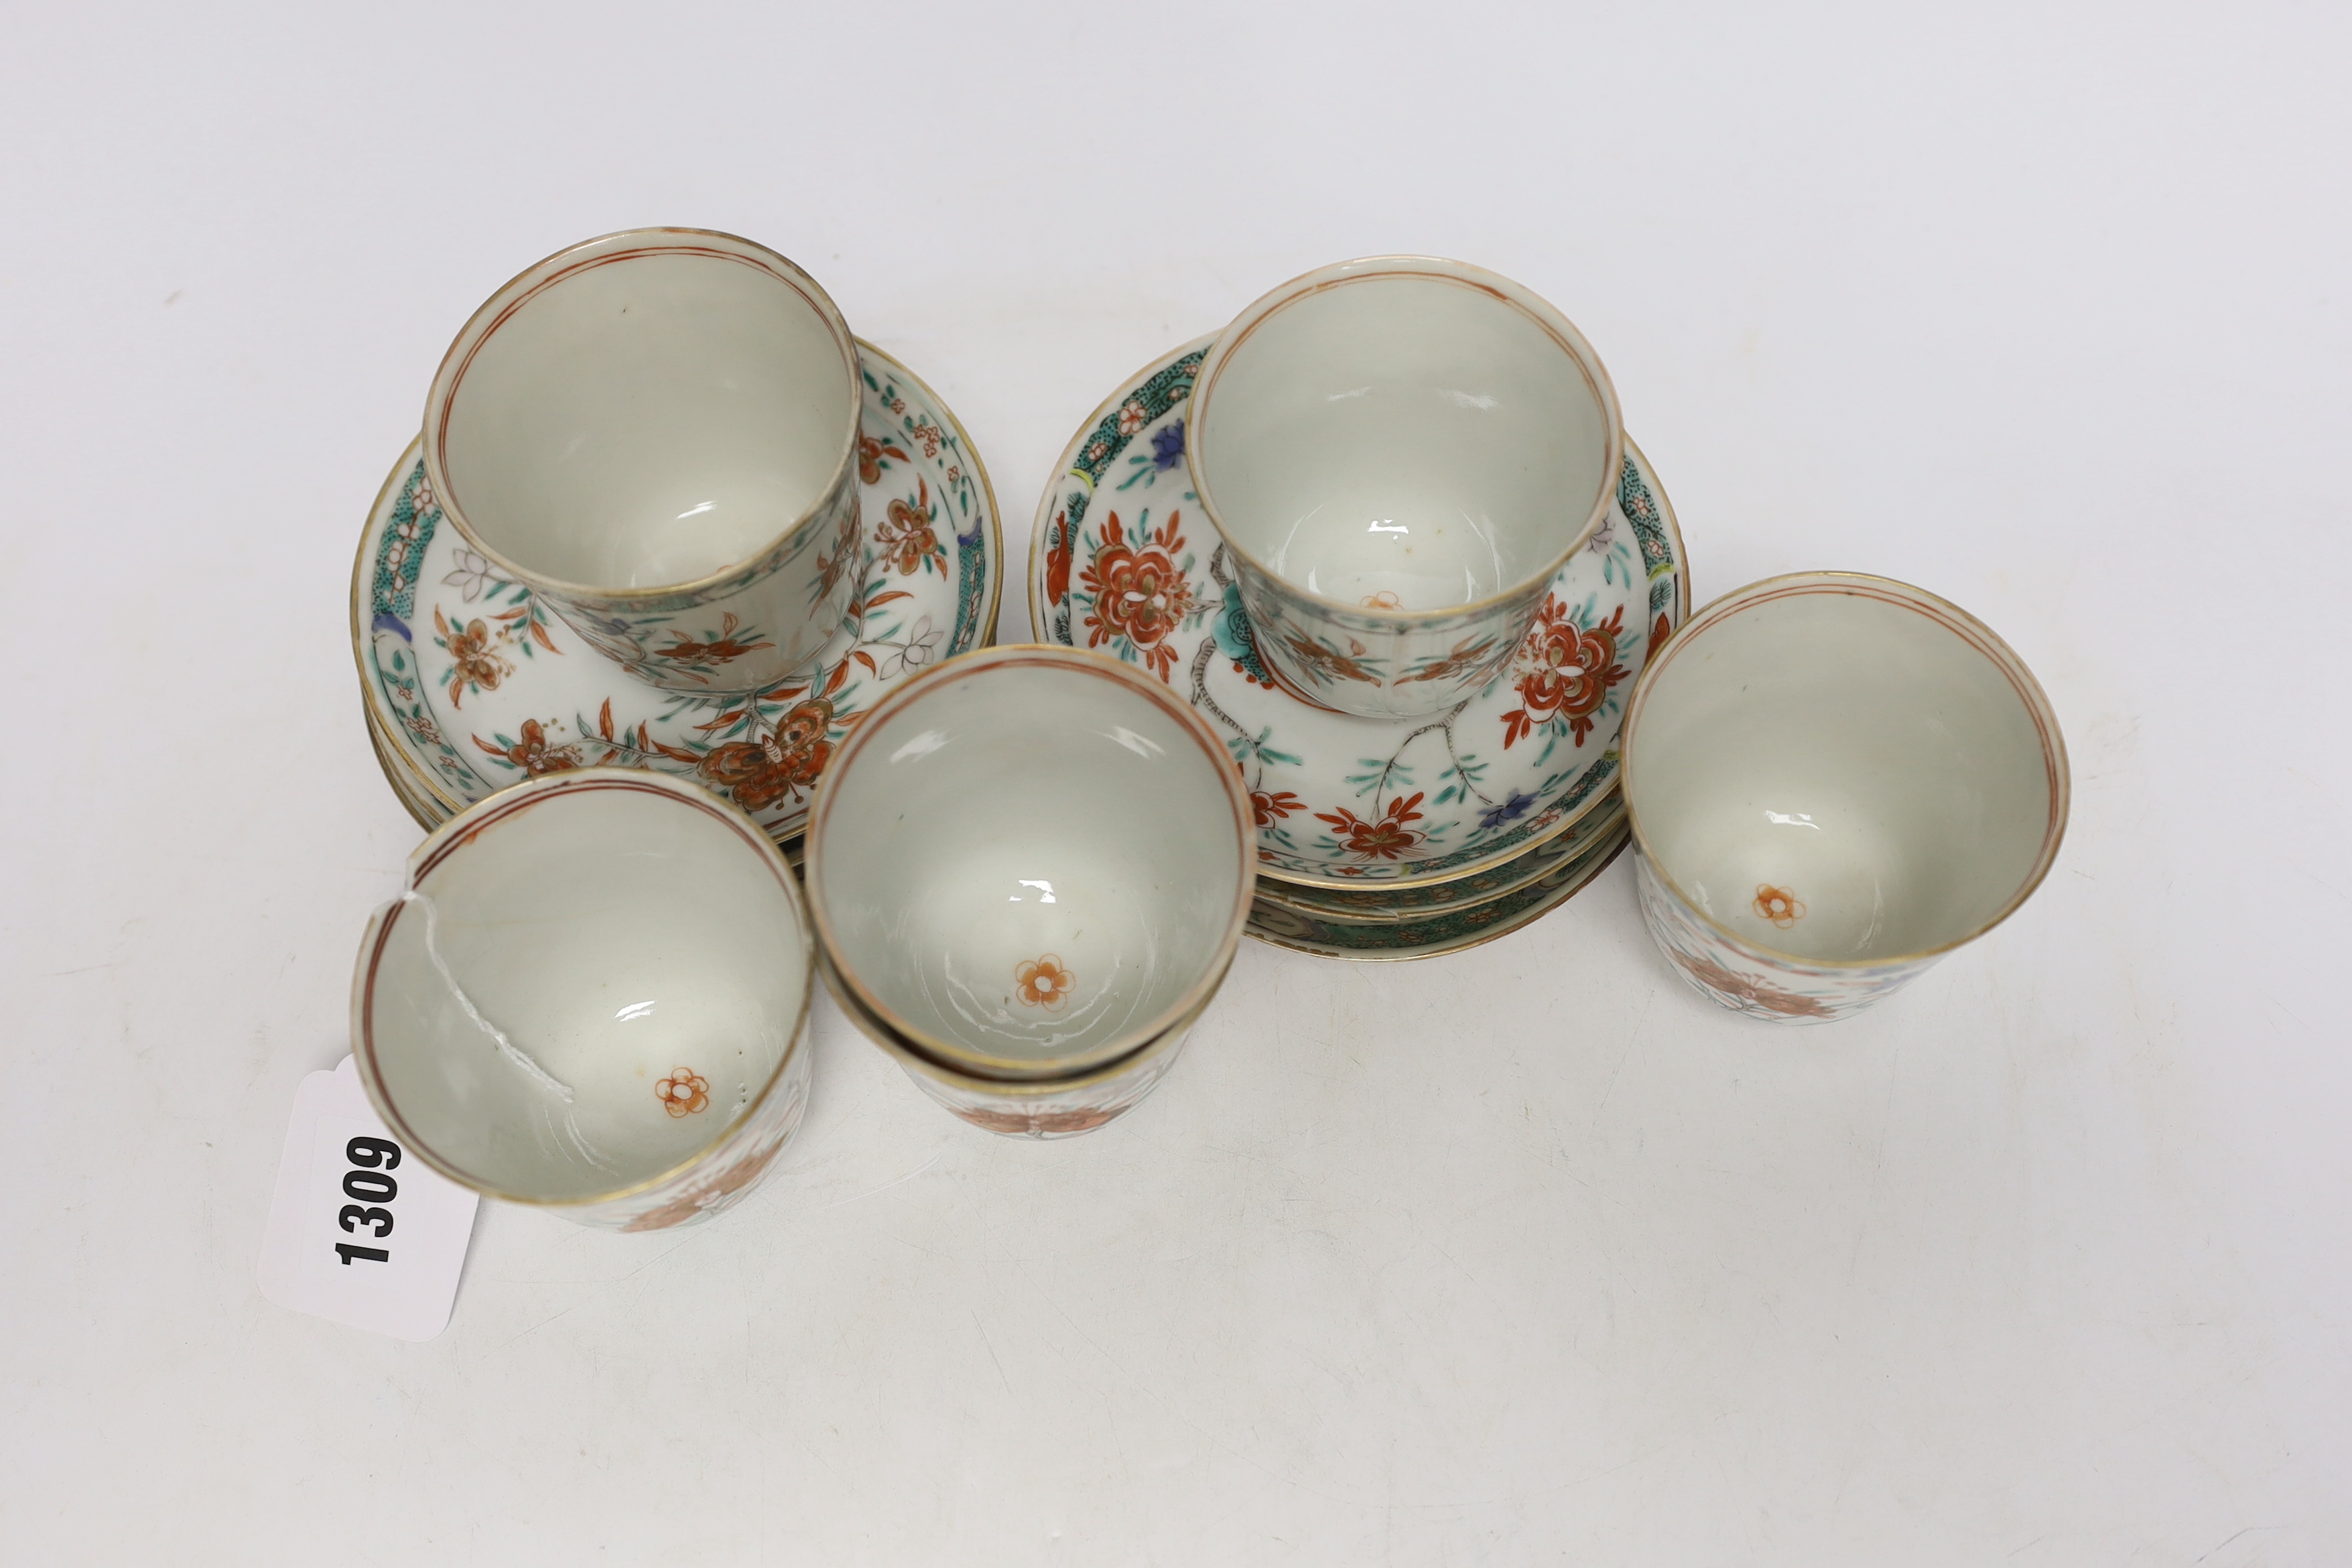 A set of six early 18th century Chinese cups and saucers with Dutch enamelled decoration, c.1710, - Image 3 of 6